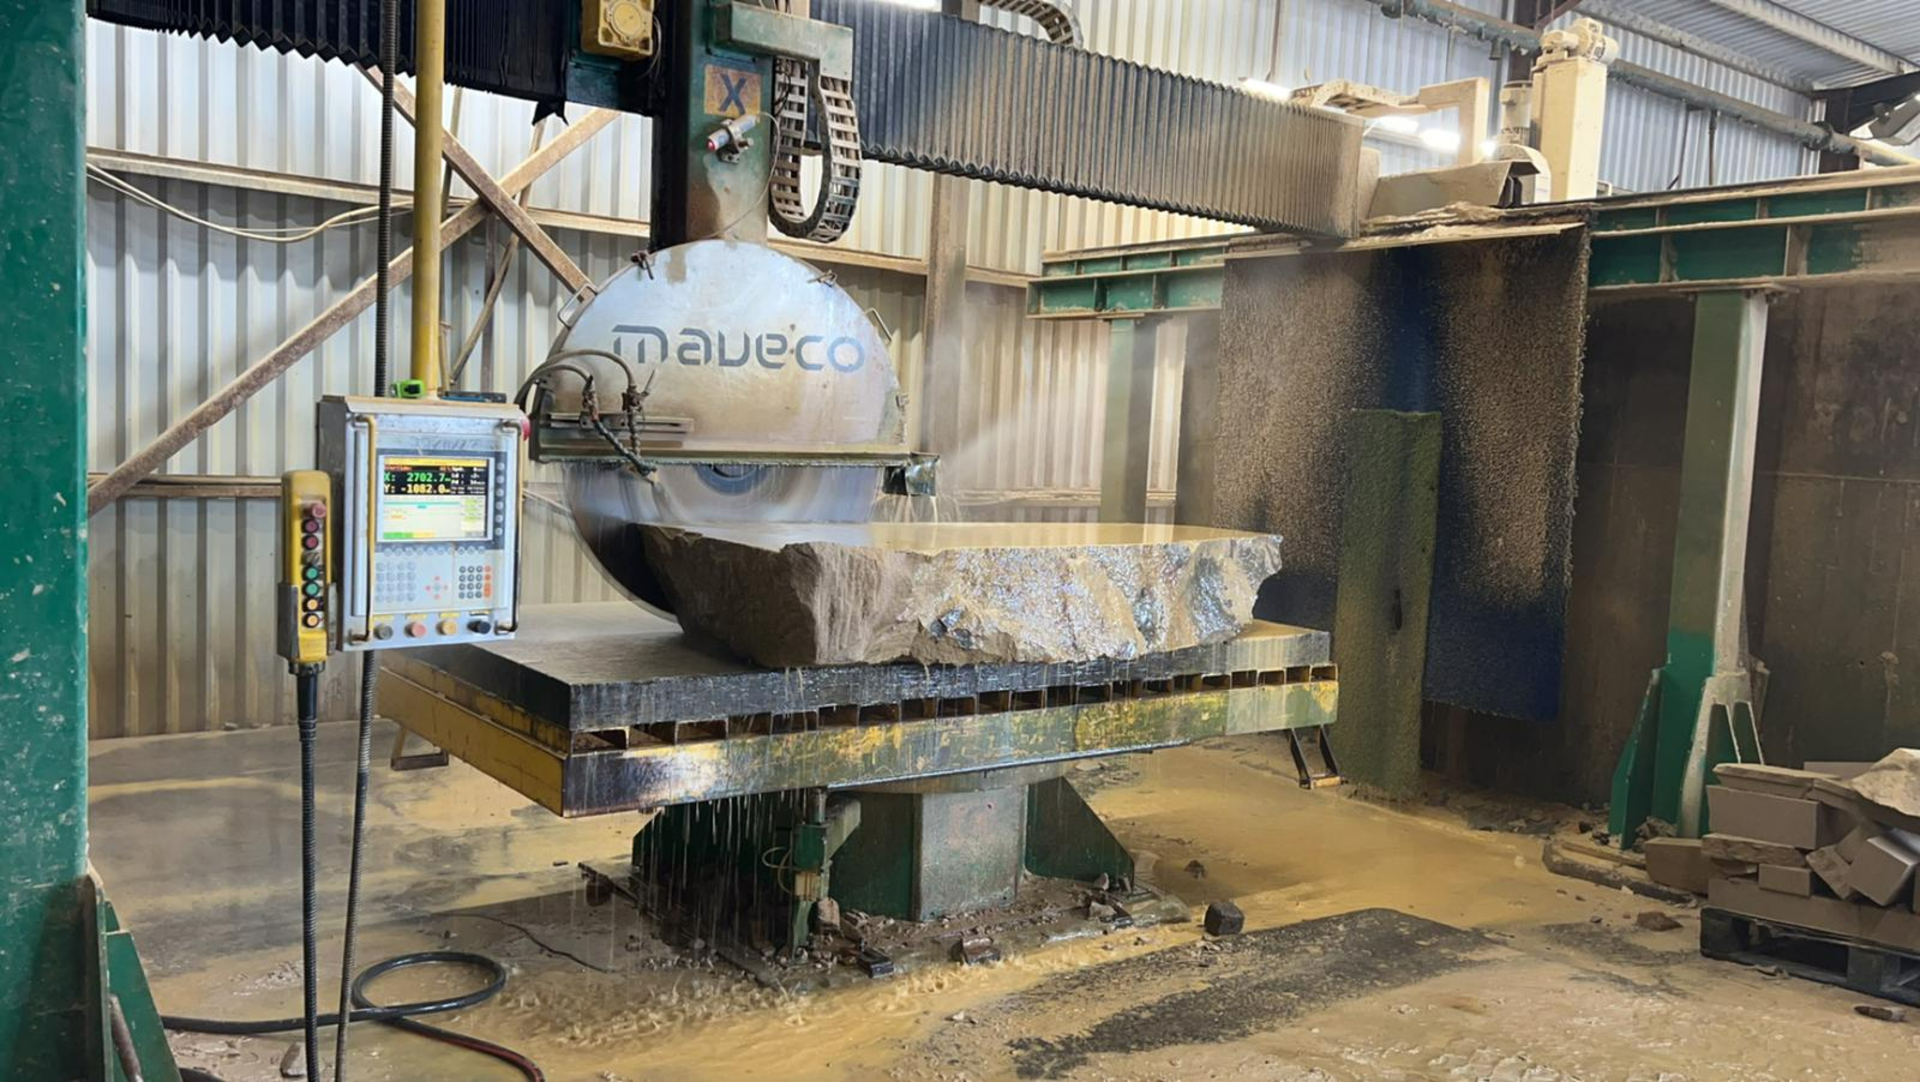 Maveco 1200 automatic Stone Saw Still in use every day Good condition  cuts like new well serviced - Image 3 of 6